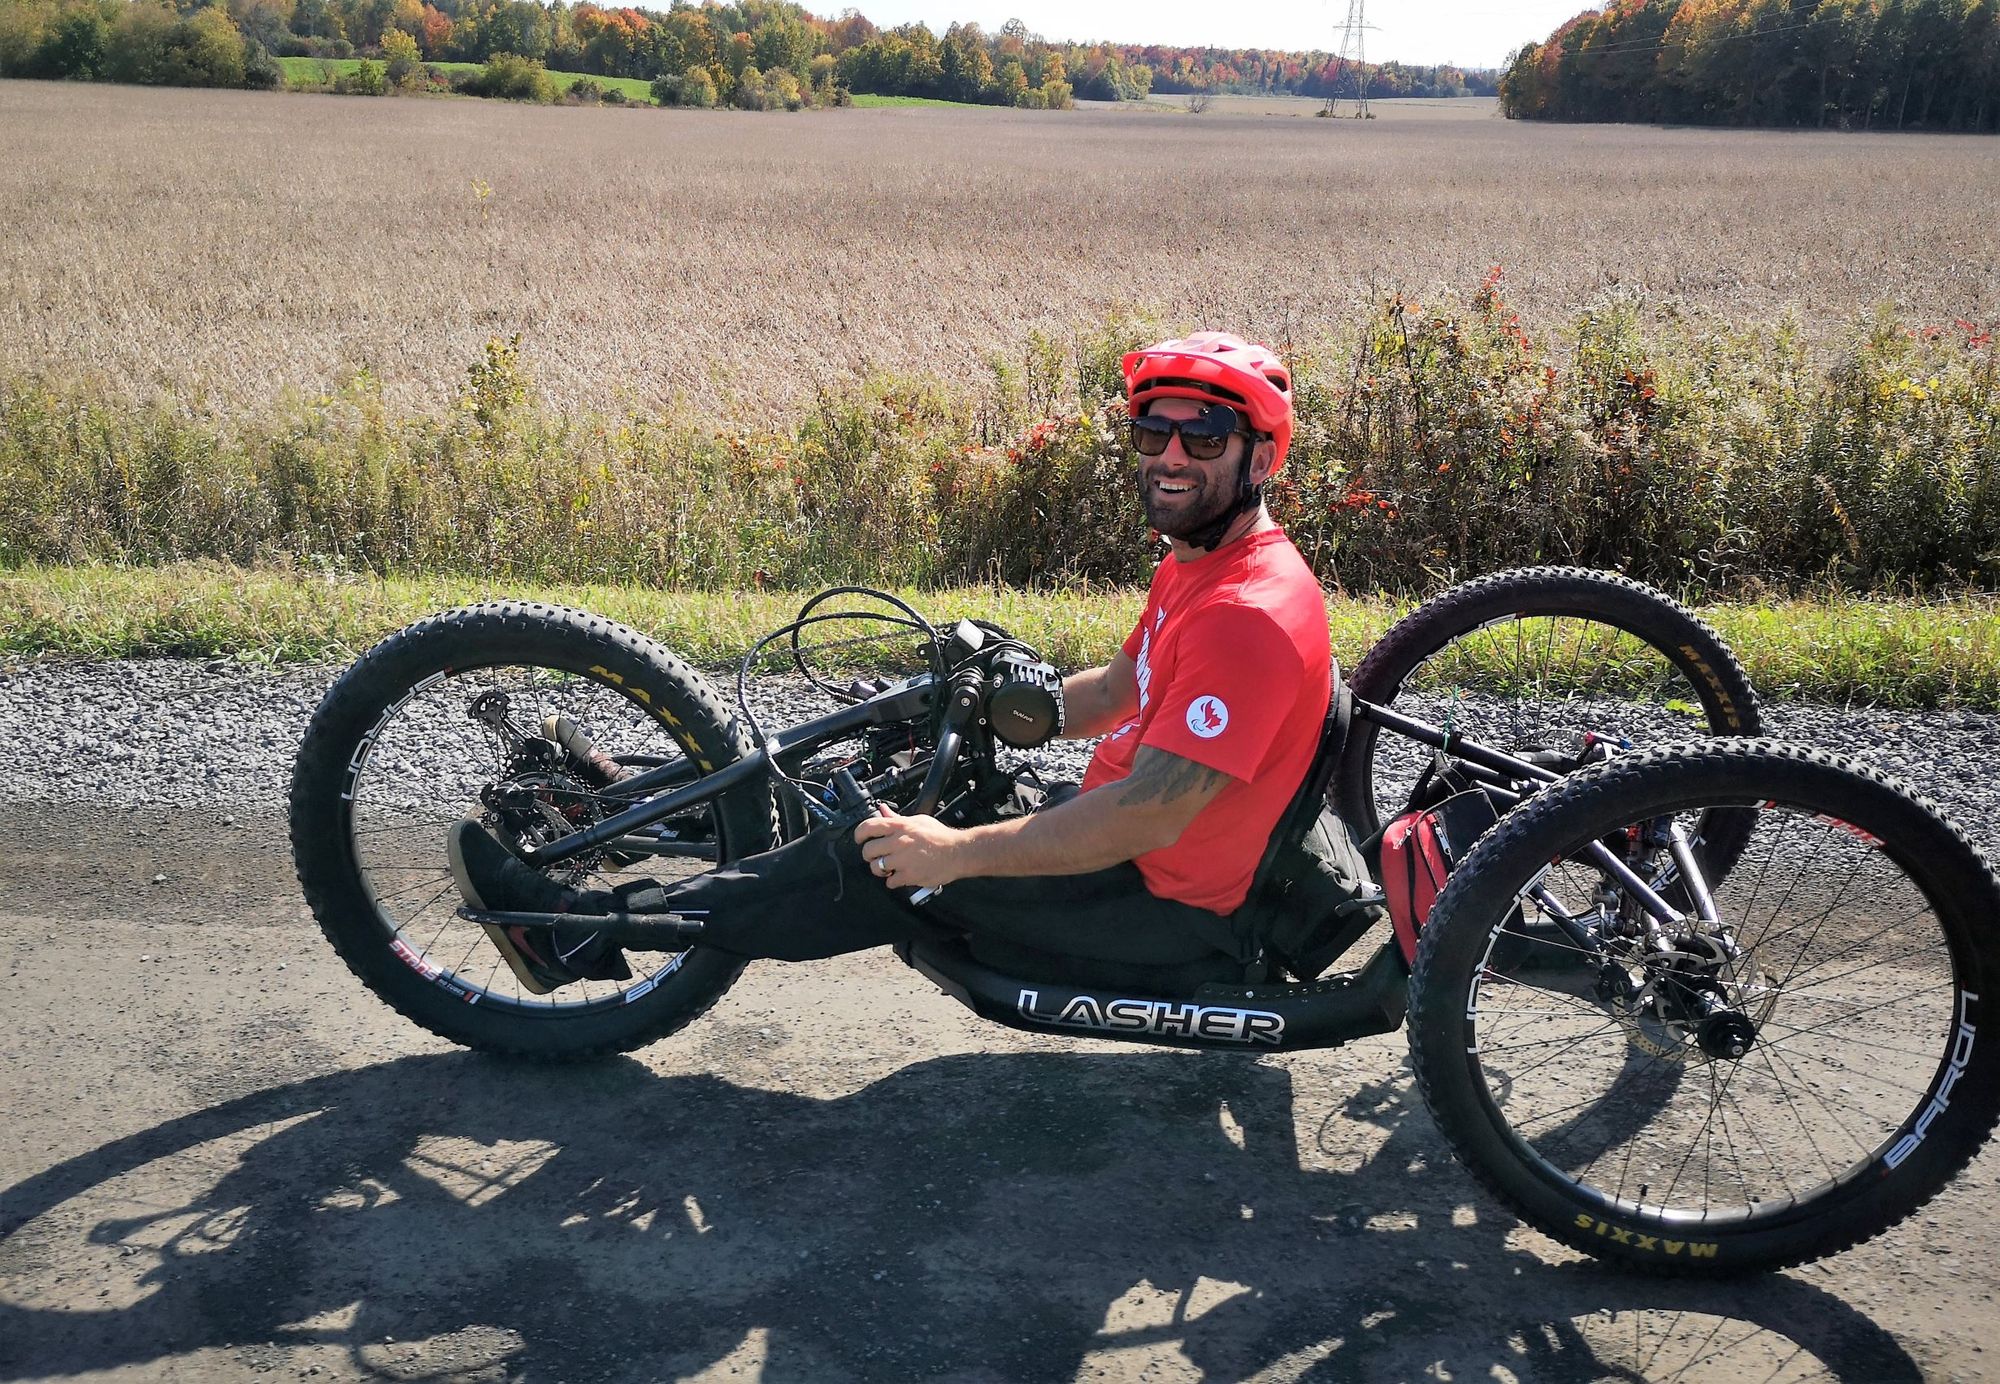 Taking a spin with Paralympian cyclist Joey Desjardins